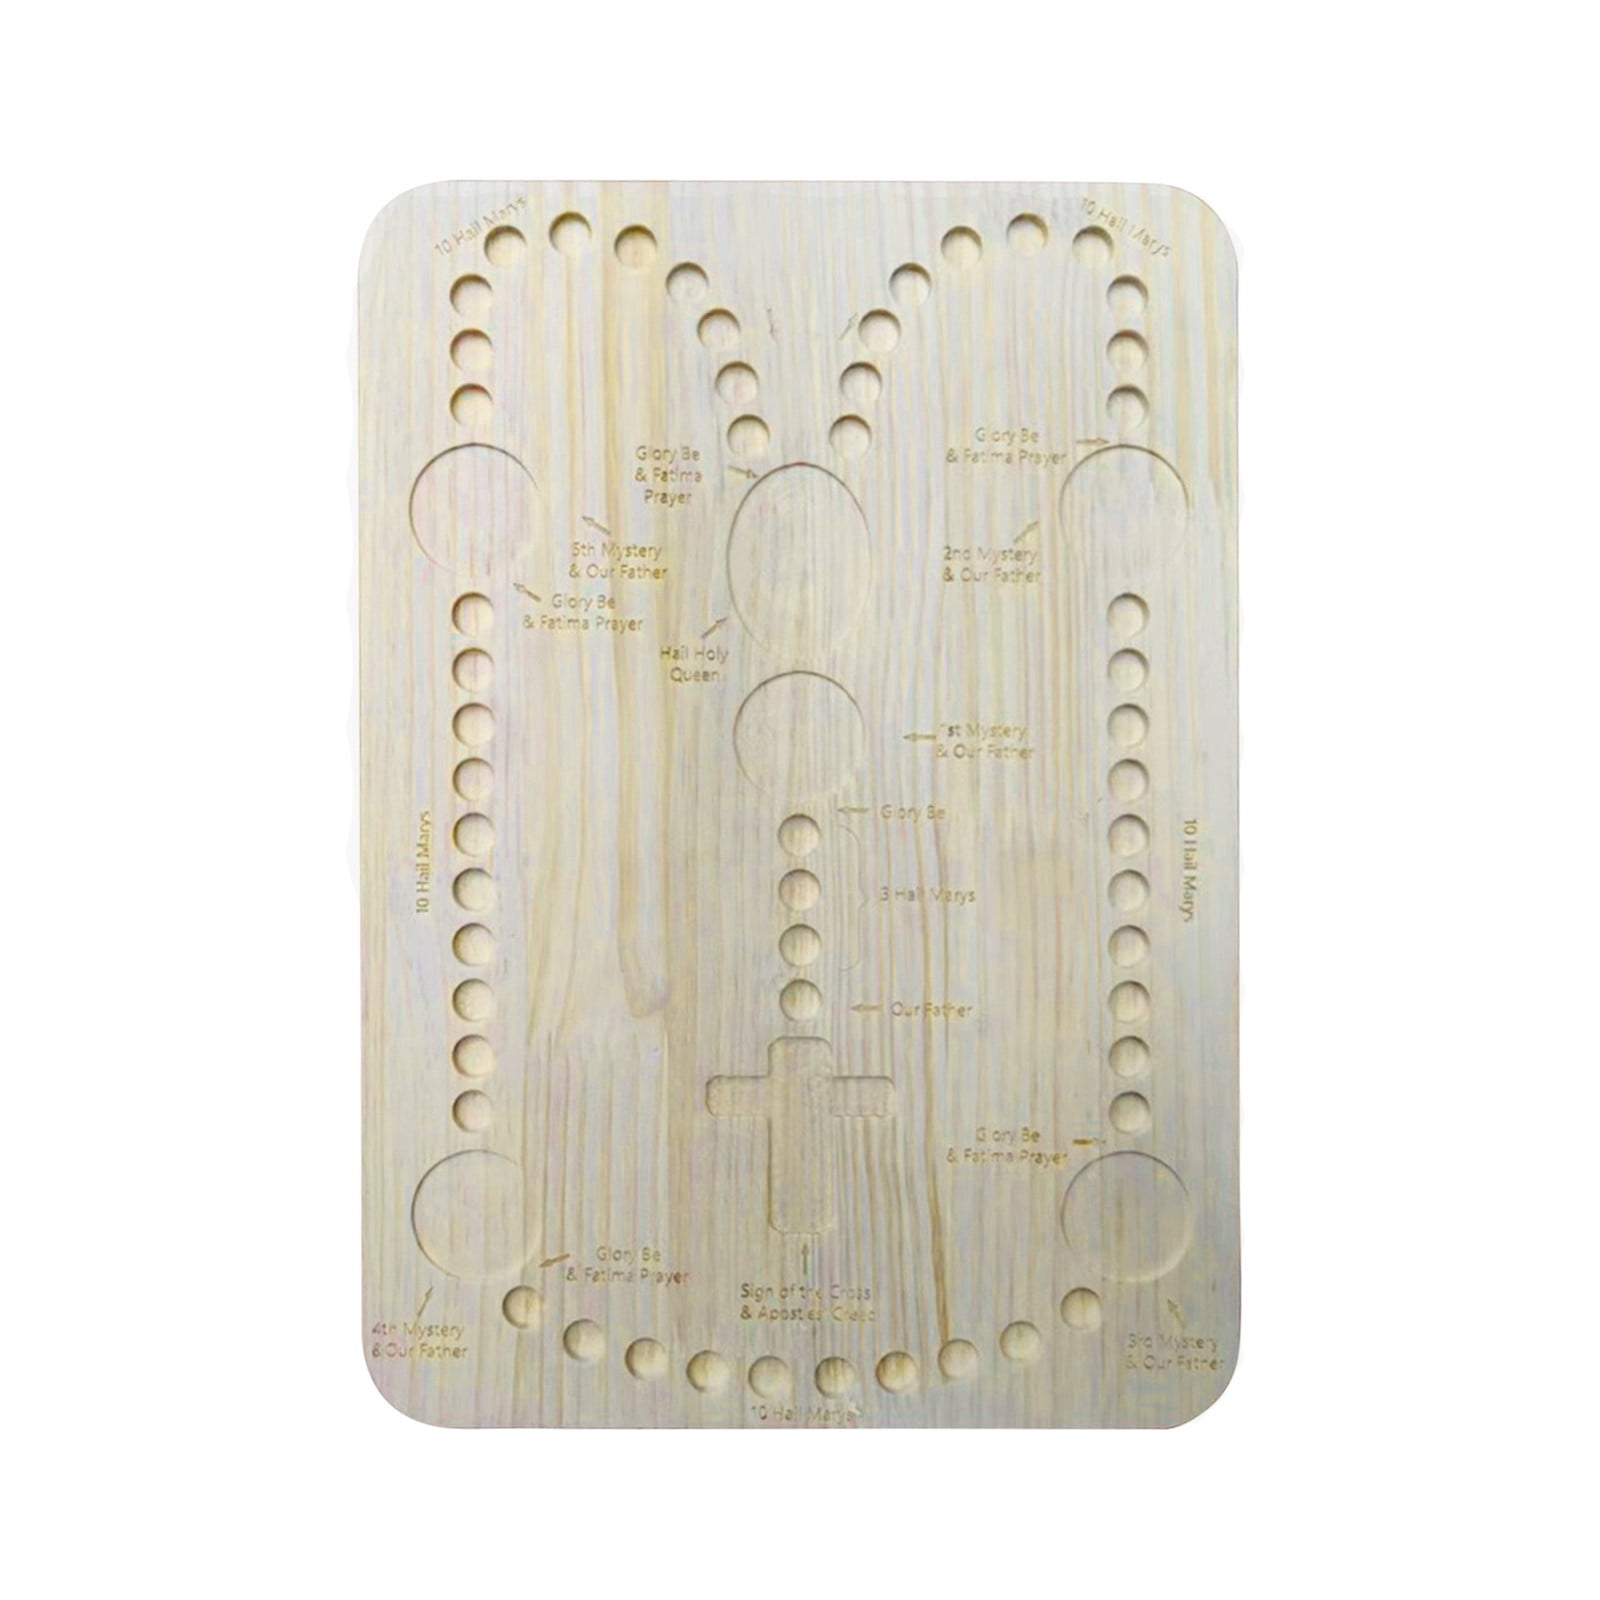  RERUICO Wooden Rosary Board with 54 Rosary & 22